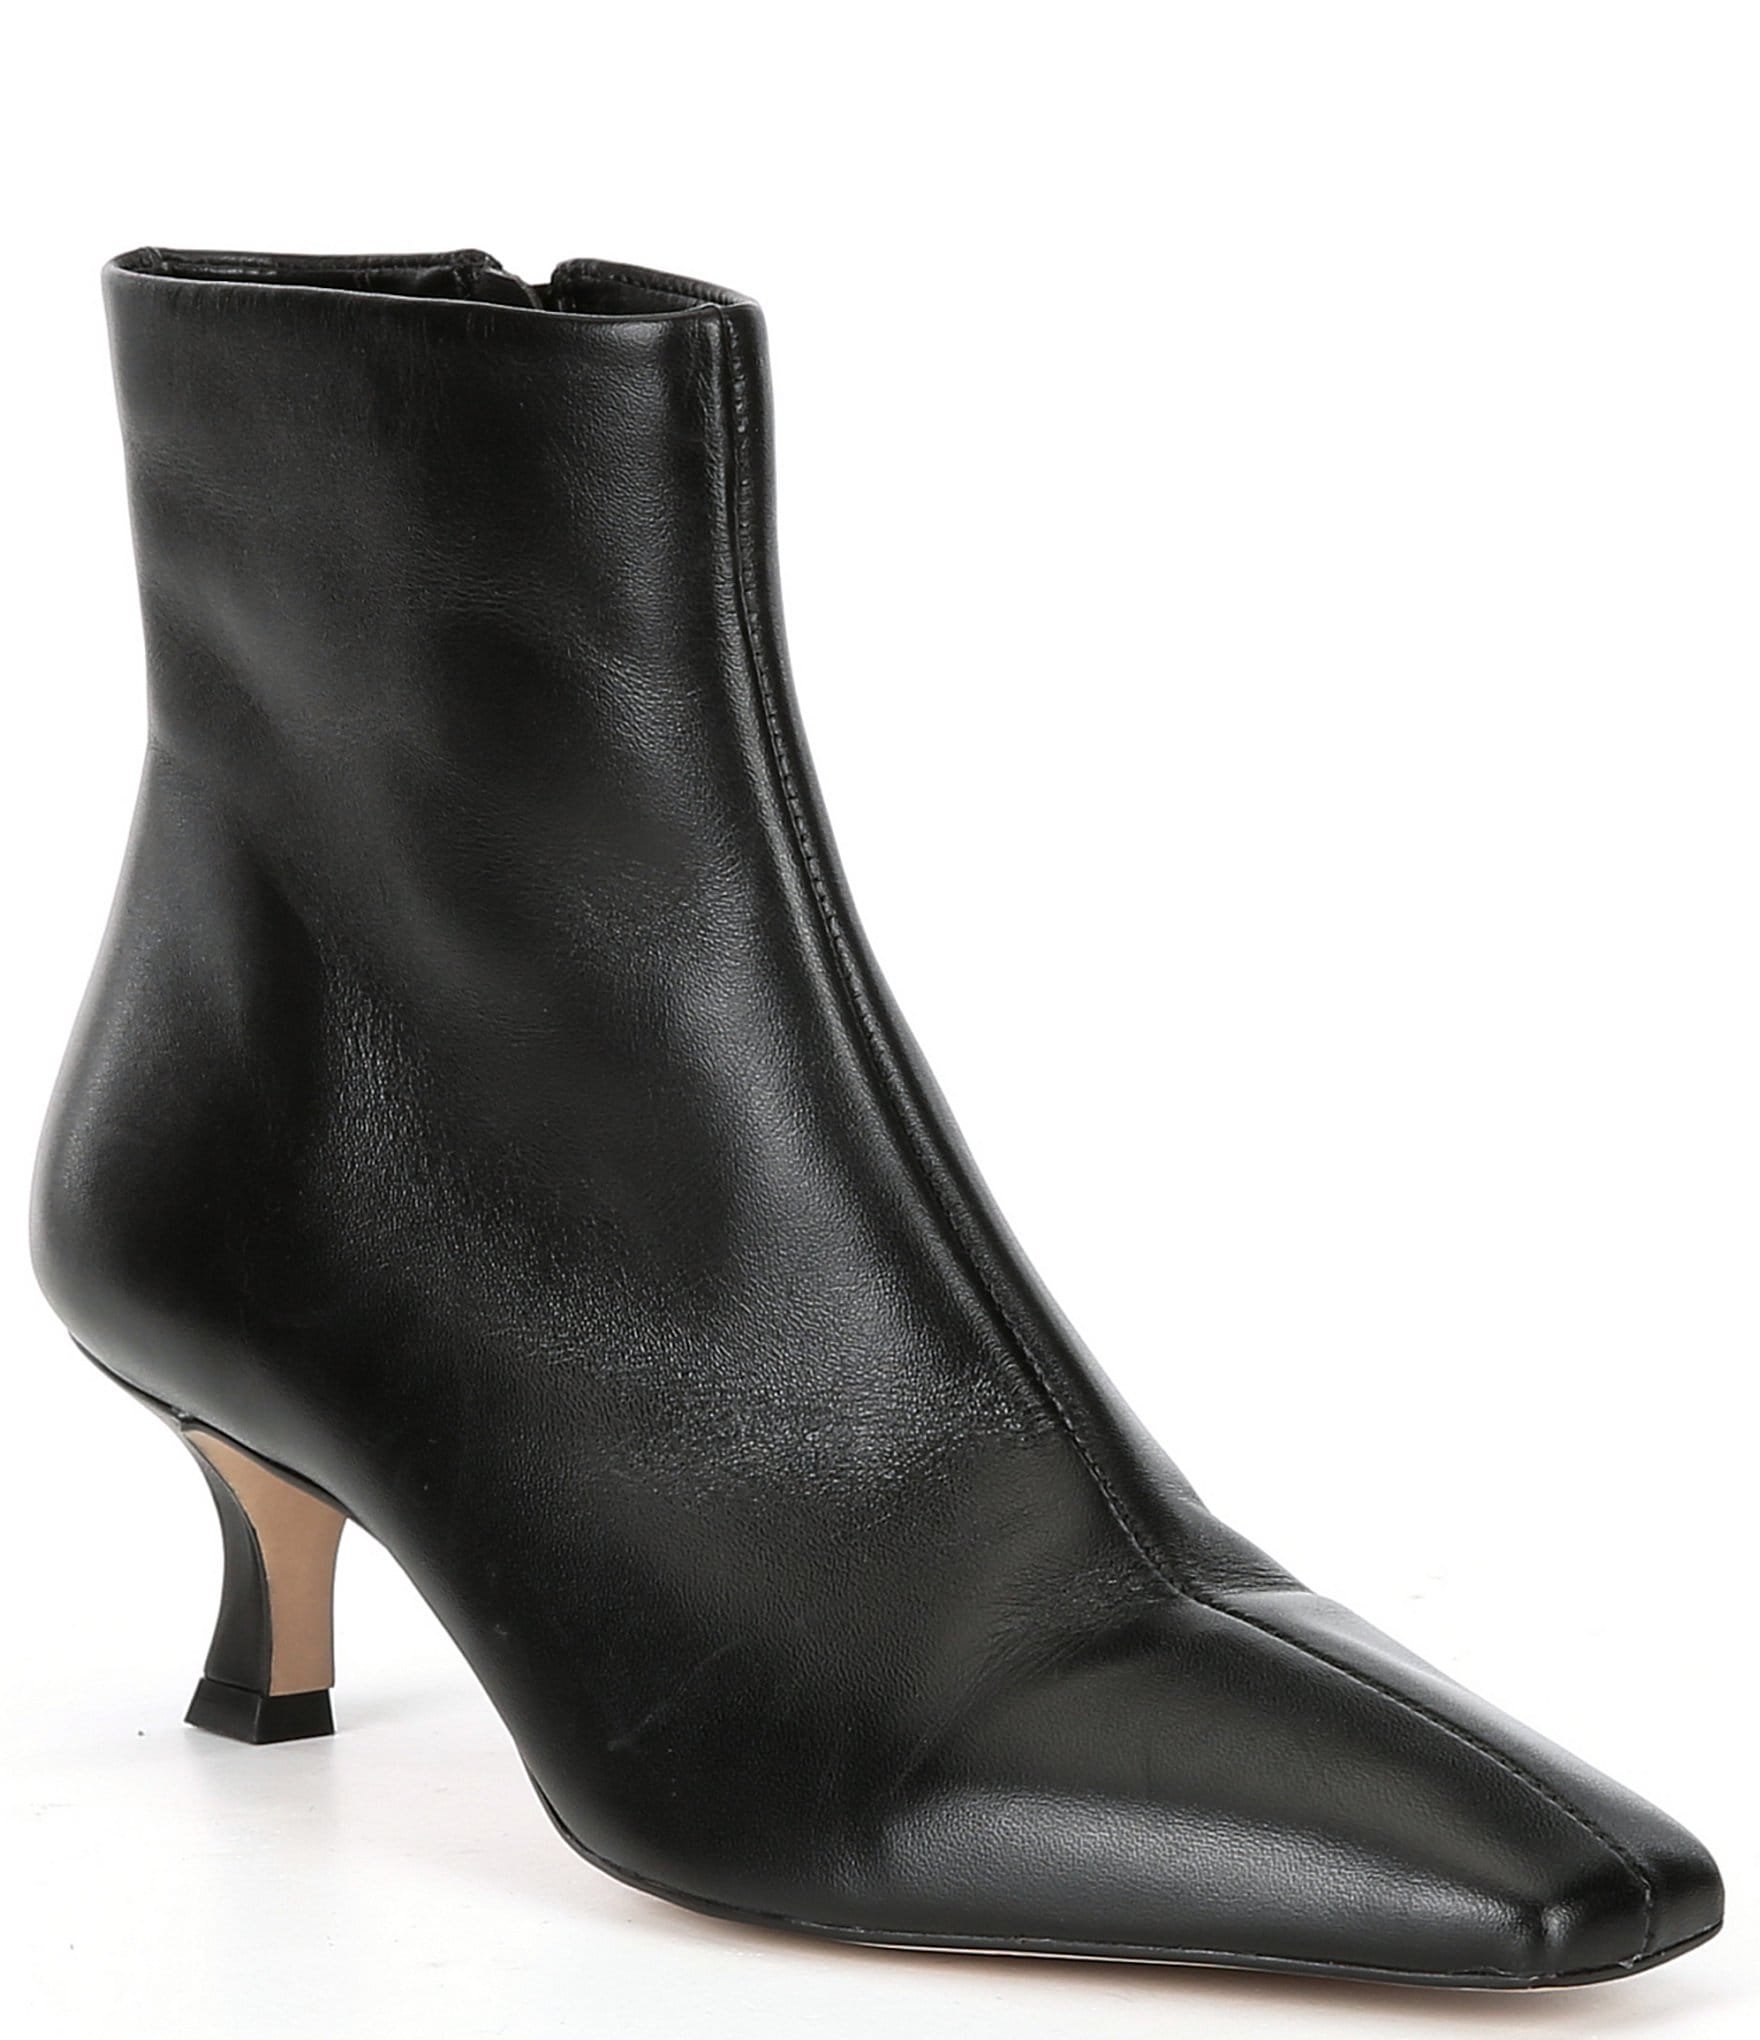 Black leather pointed toe ankle boot | Boot shoes women, Heeled boots, Boots